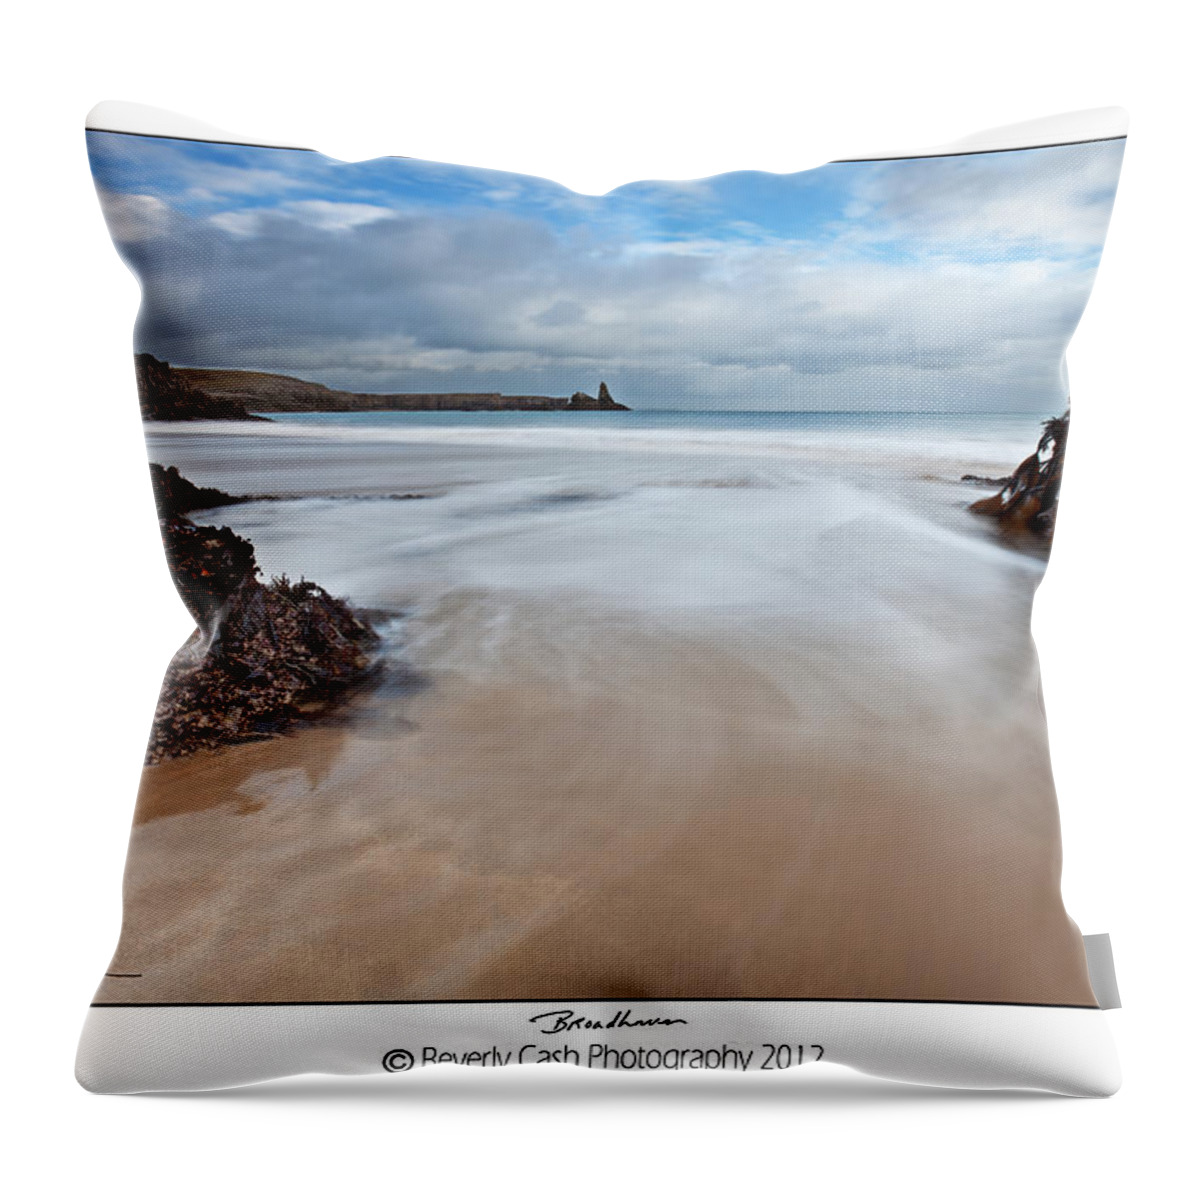 Broadhaven Throw Pillow featuring the photograph Broadhaven by B Cash